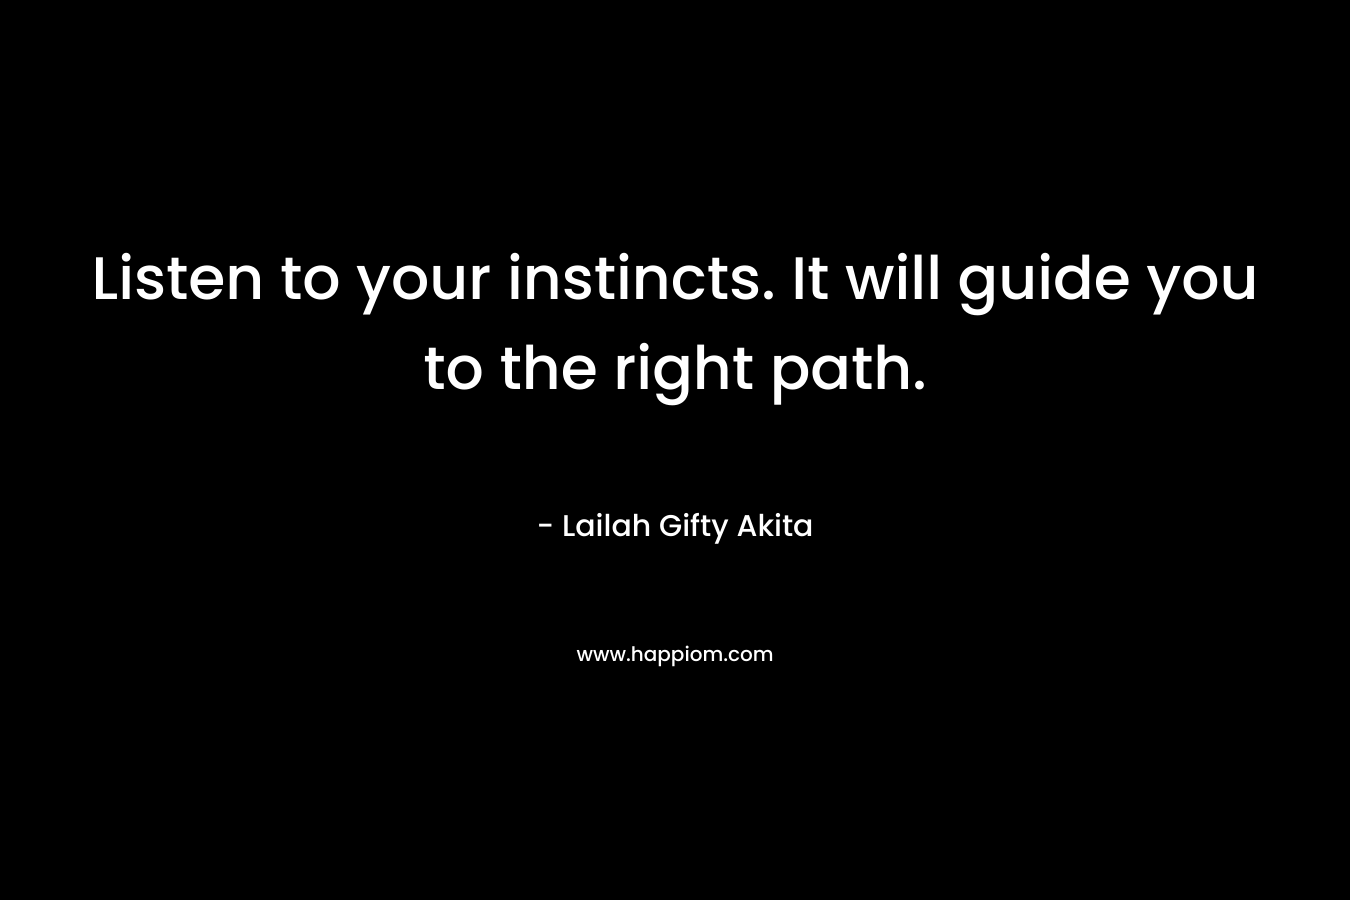 Listen to your instincts. It will guide you to the right path. – Lailah Gifty Akita